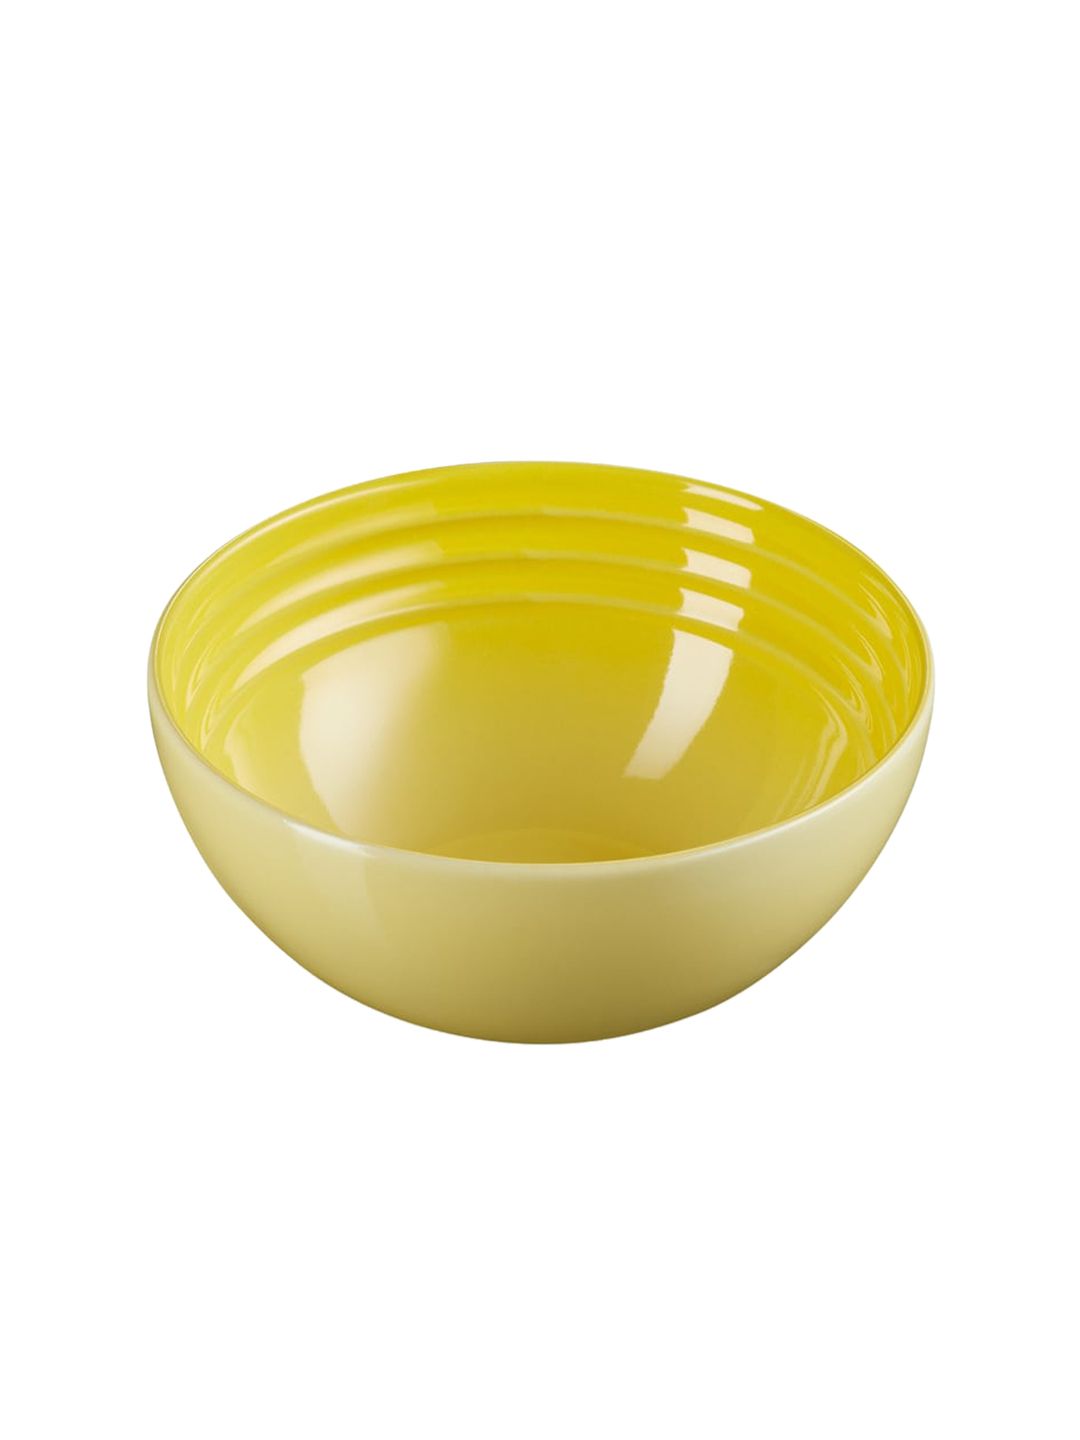 LE CREUSET Yellow Solid Round Serving Bowl Price in India